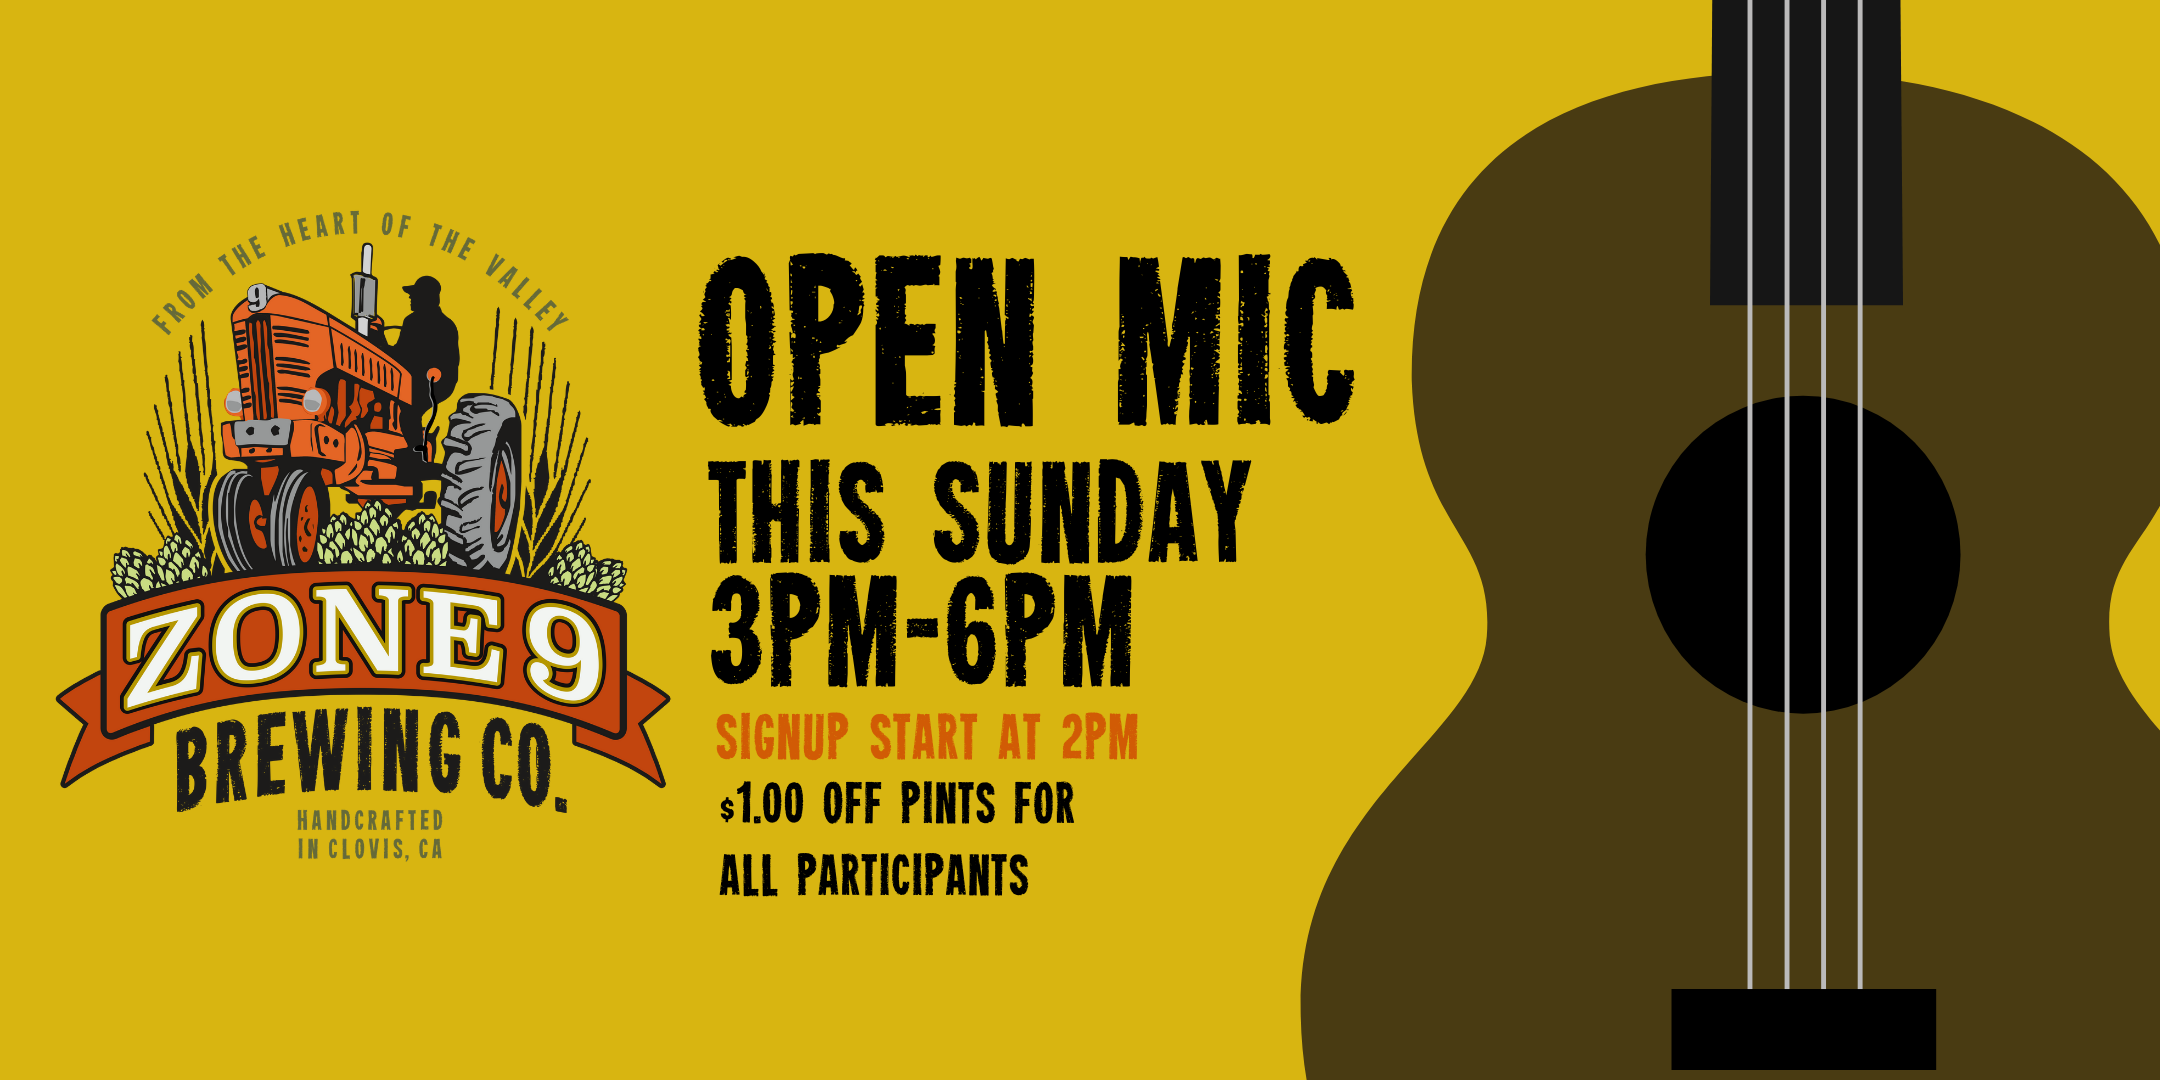 Open Mic Night at Zone 9 Brewing Co